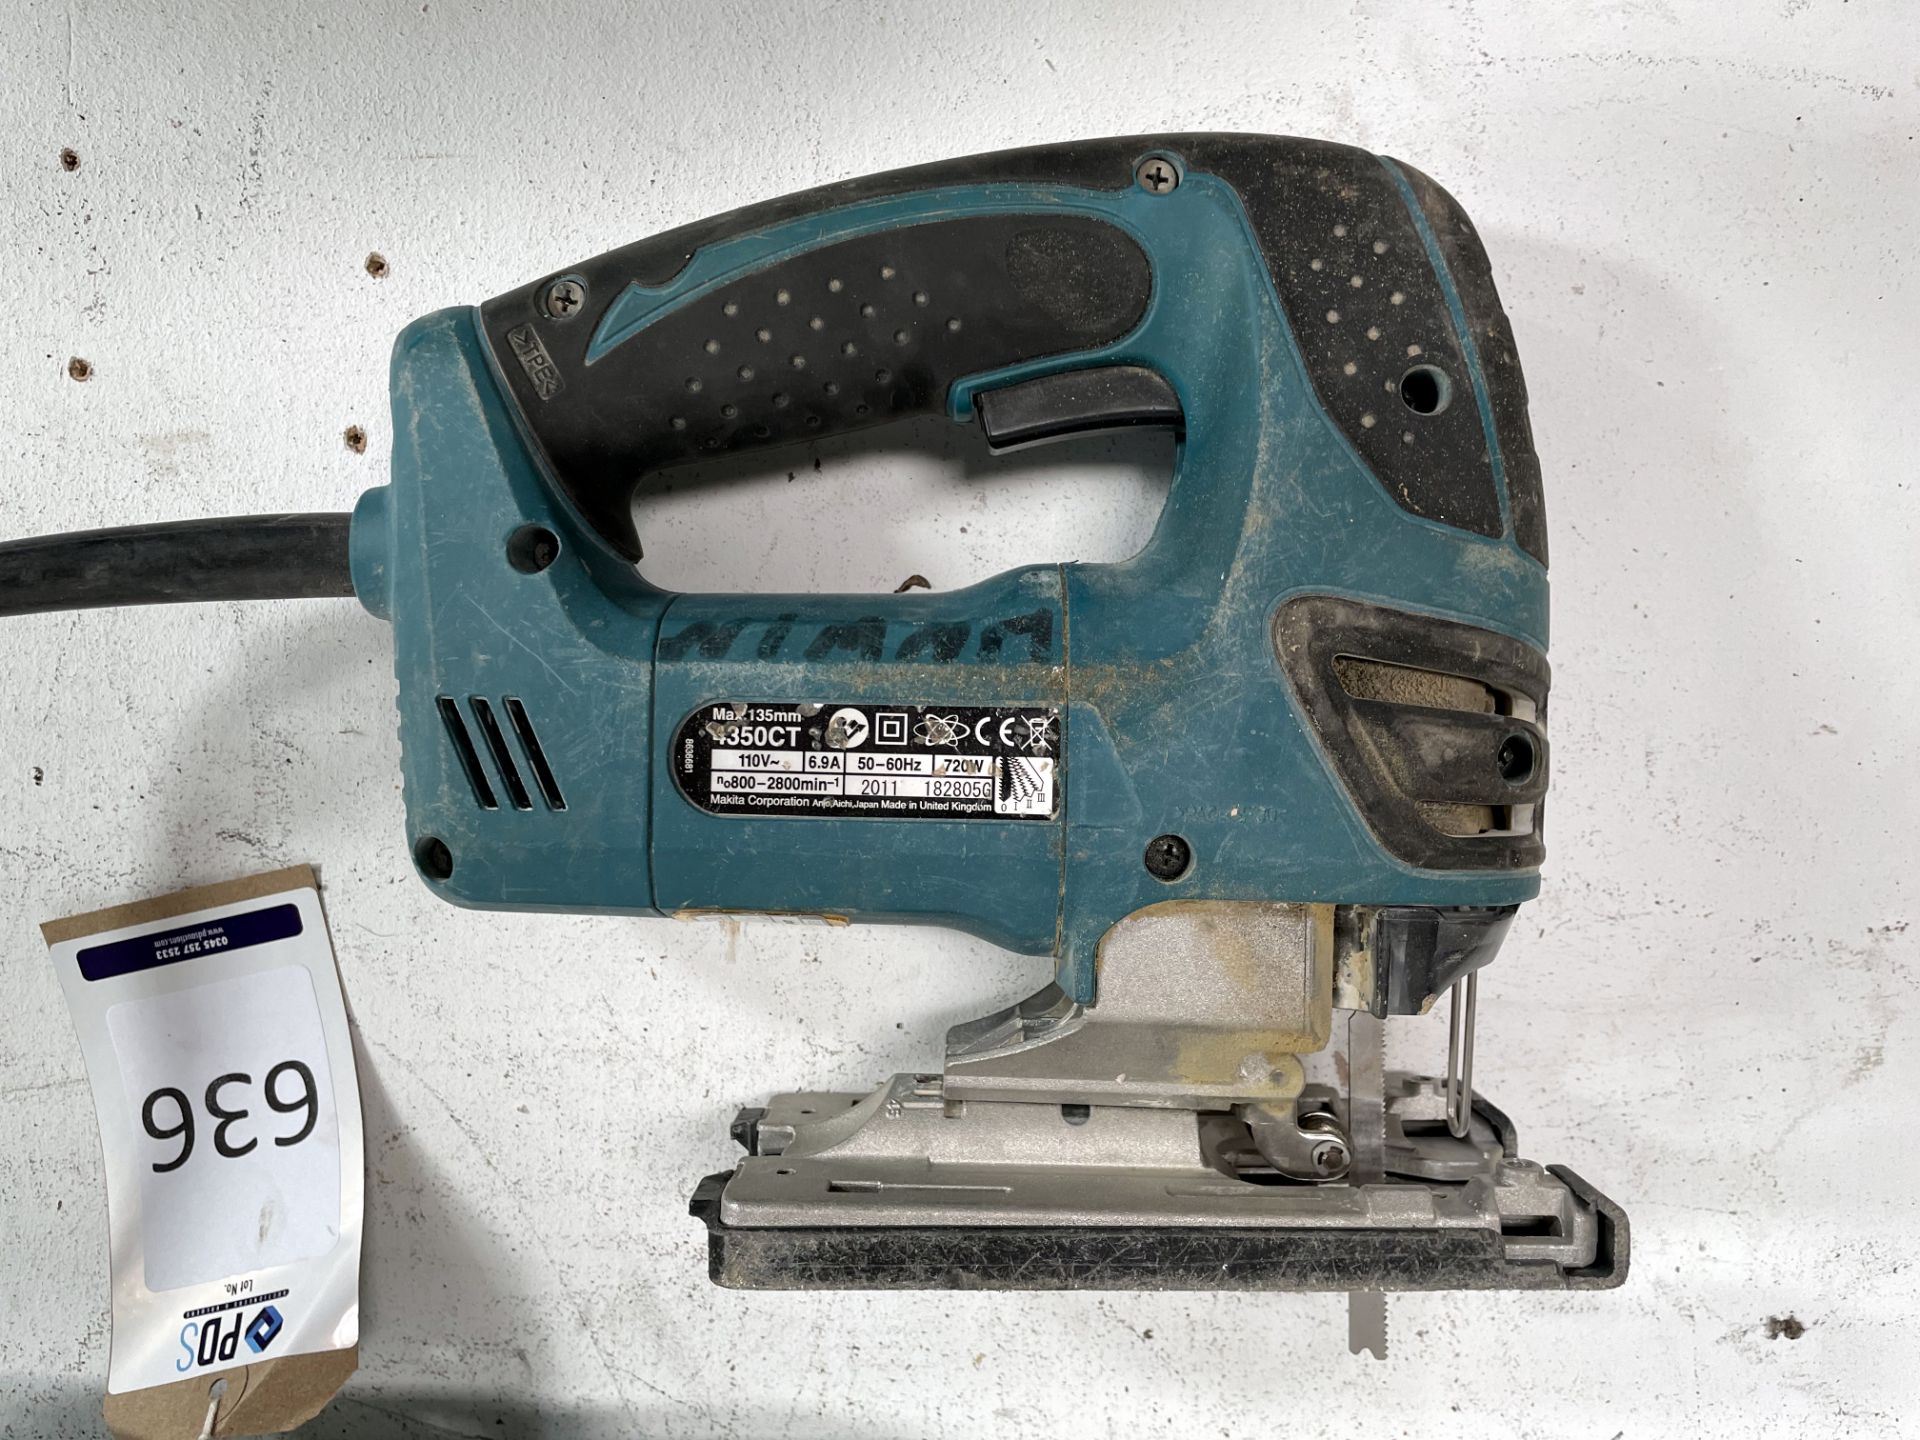 Makita 4350CT Jigsaw, 110v (Location: Brentwood. Please Refer to General Notes) - Image 2 of 2